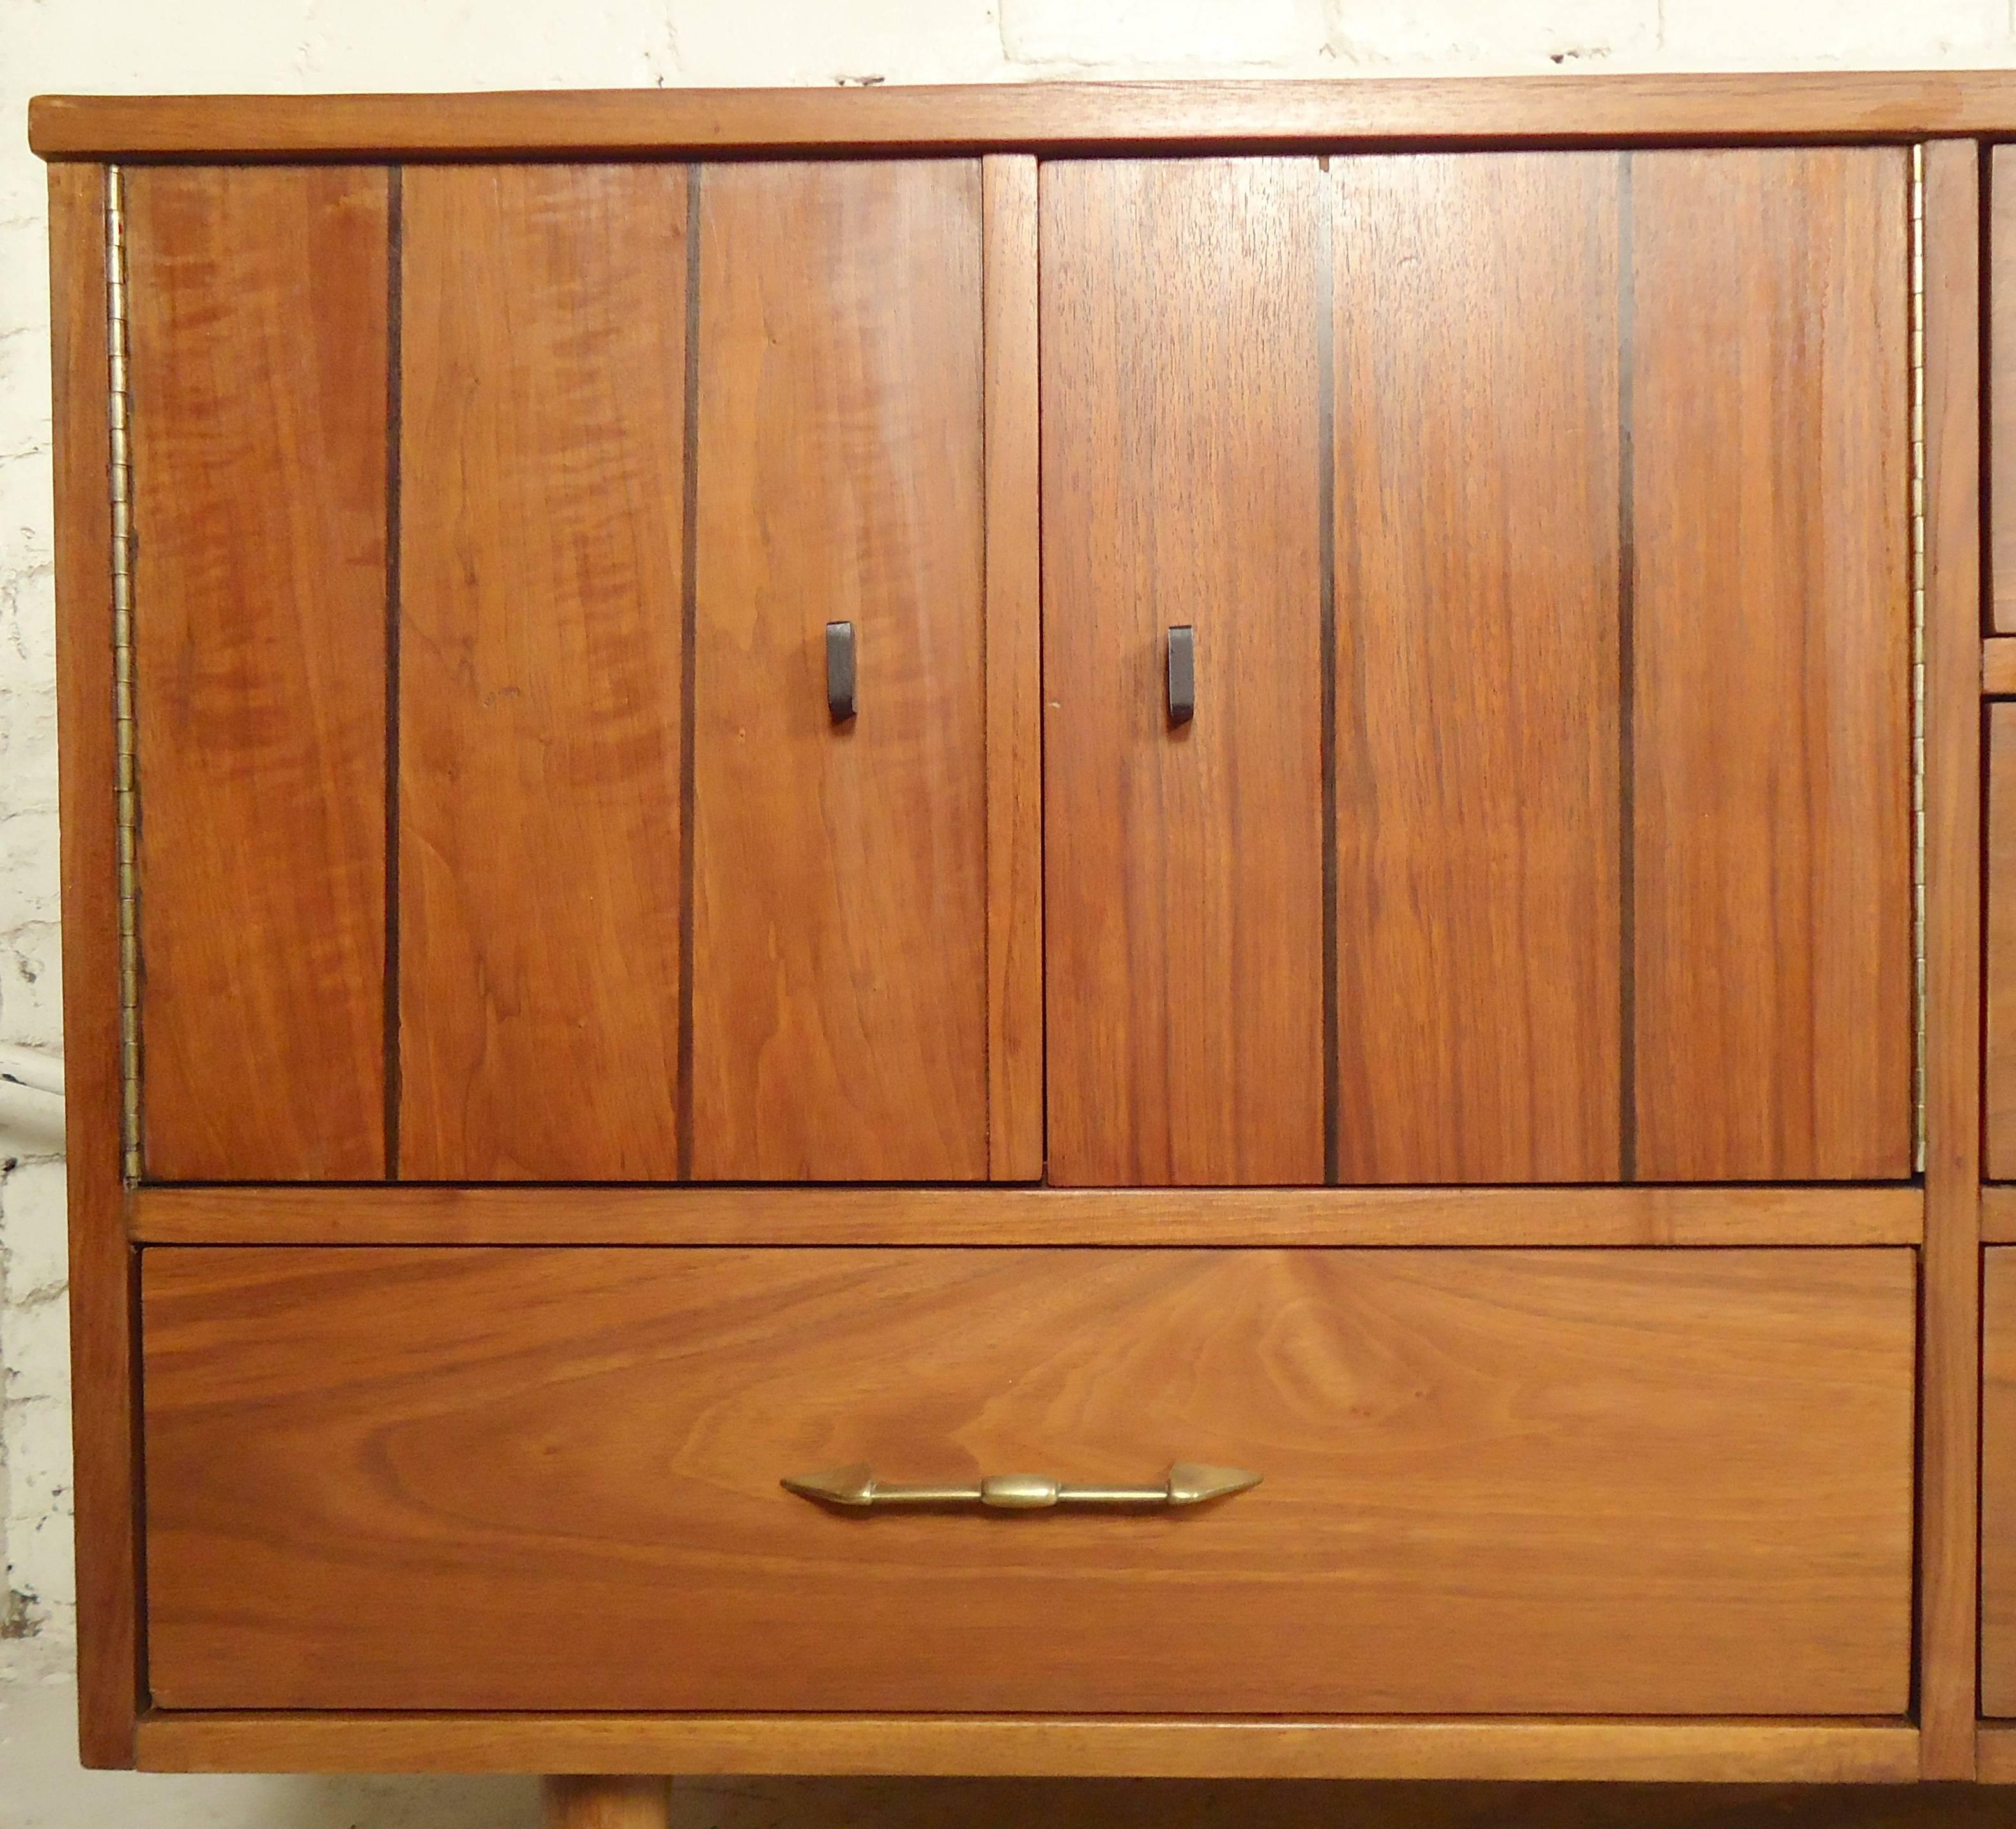 American vintage dresser with warm walnut grain. Long credenza style with four drawers and side cabinet. Accenting brass handles.

(Please confirm item location NY or NJ with dealer).
           